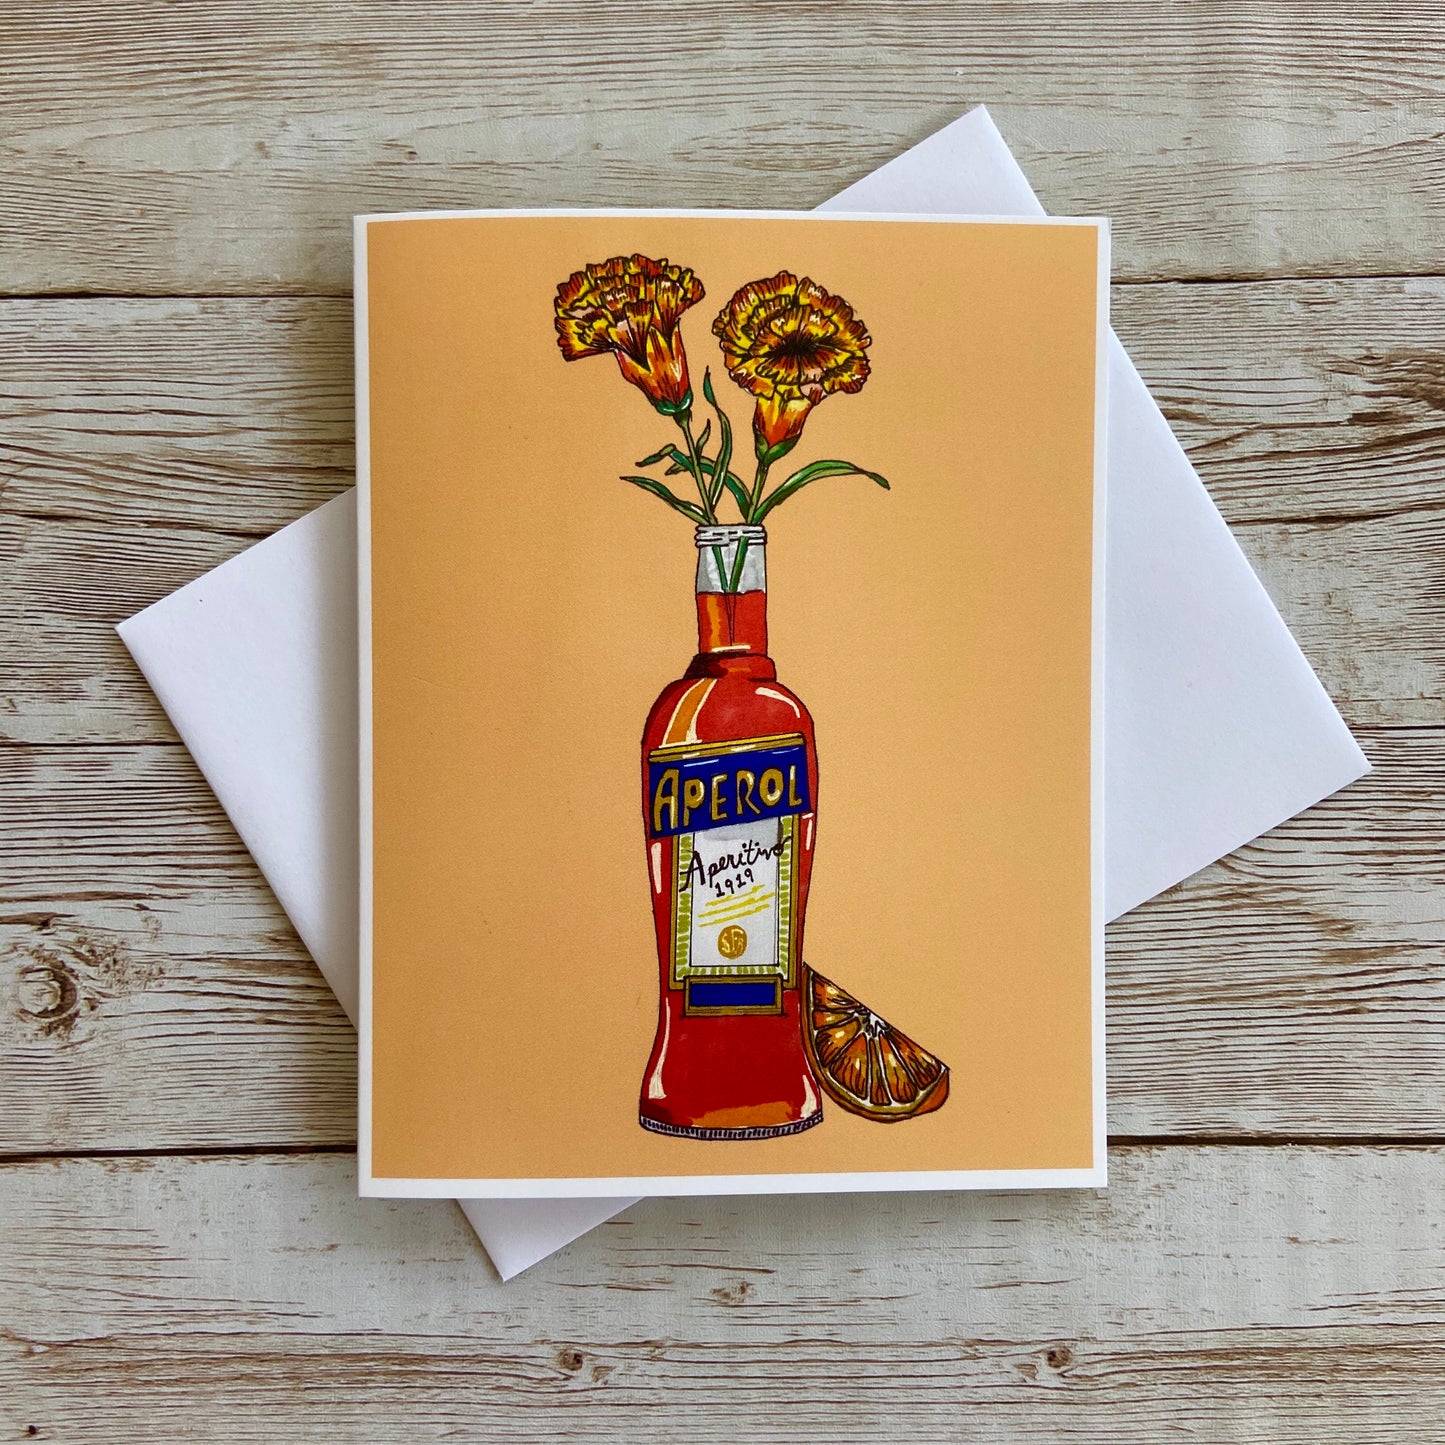 Greeting card with orange Aperol bottle and carnation flowers